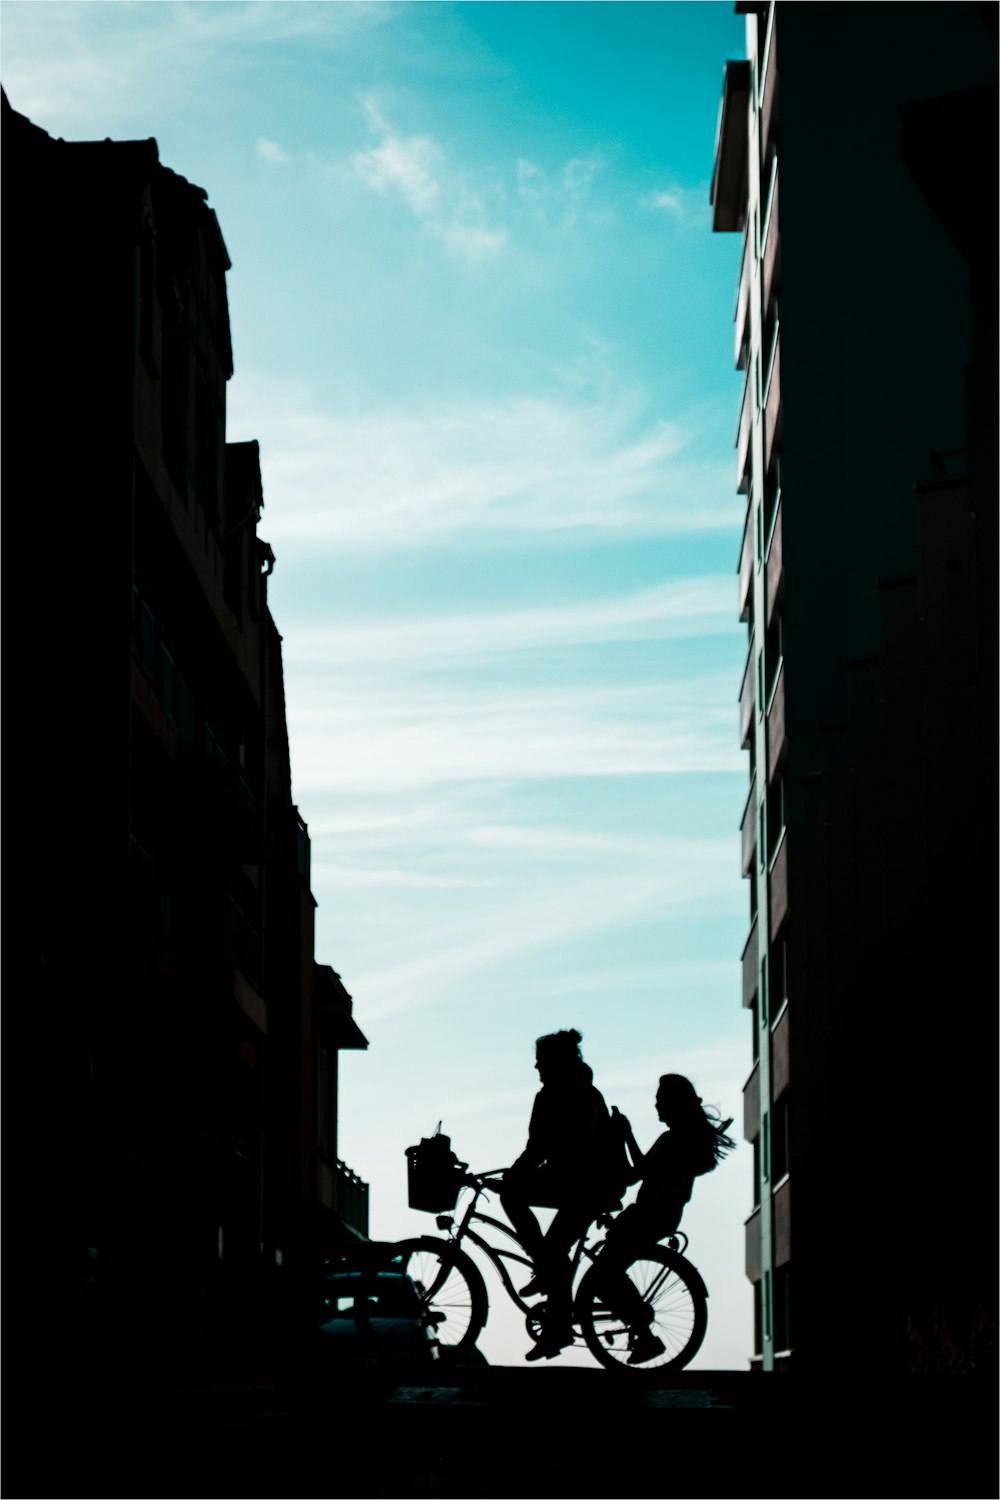 silhouette of man riding bicycle on road between high rise buildings during daytime